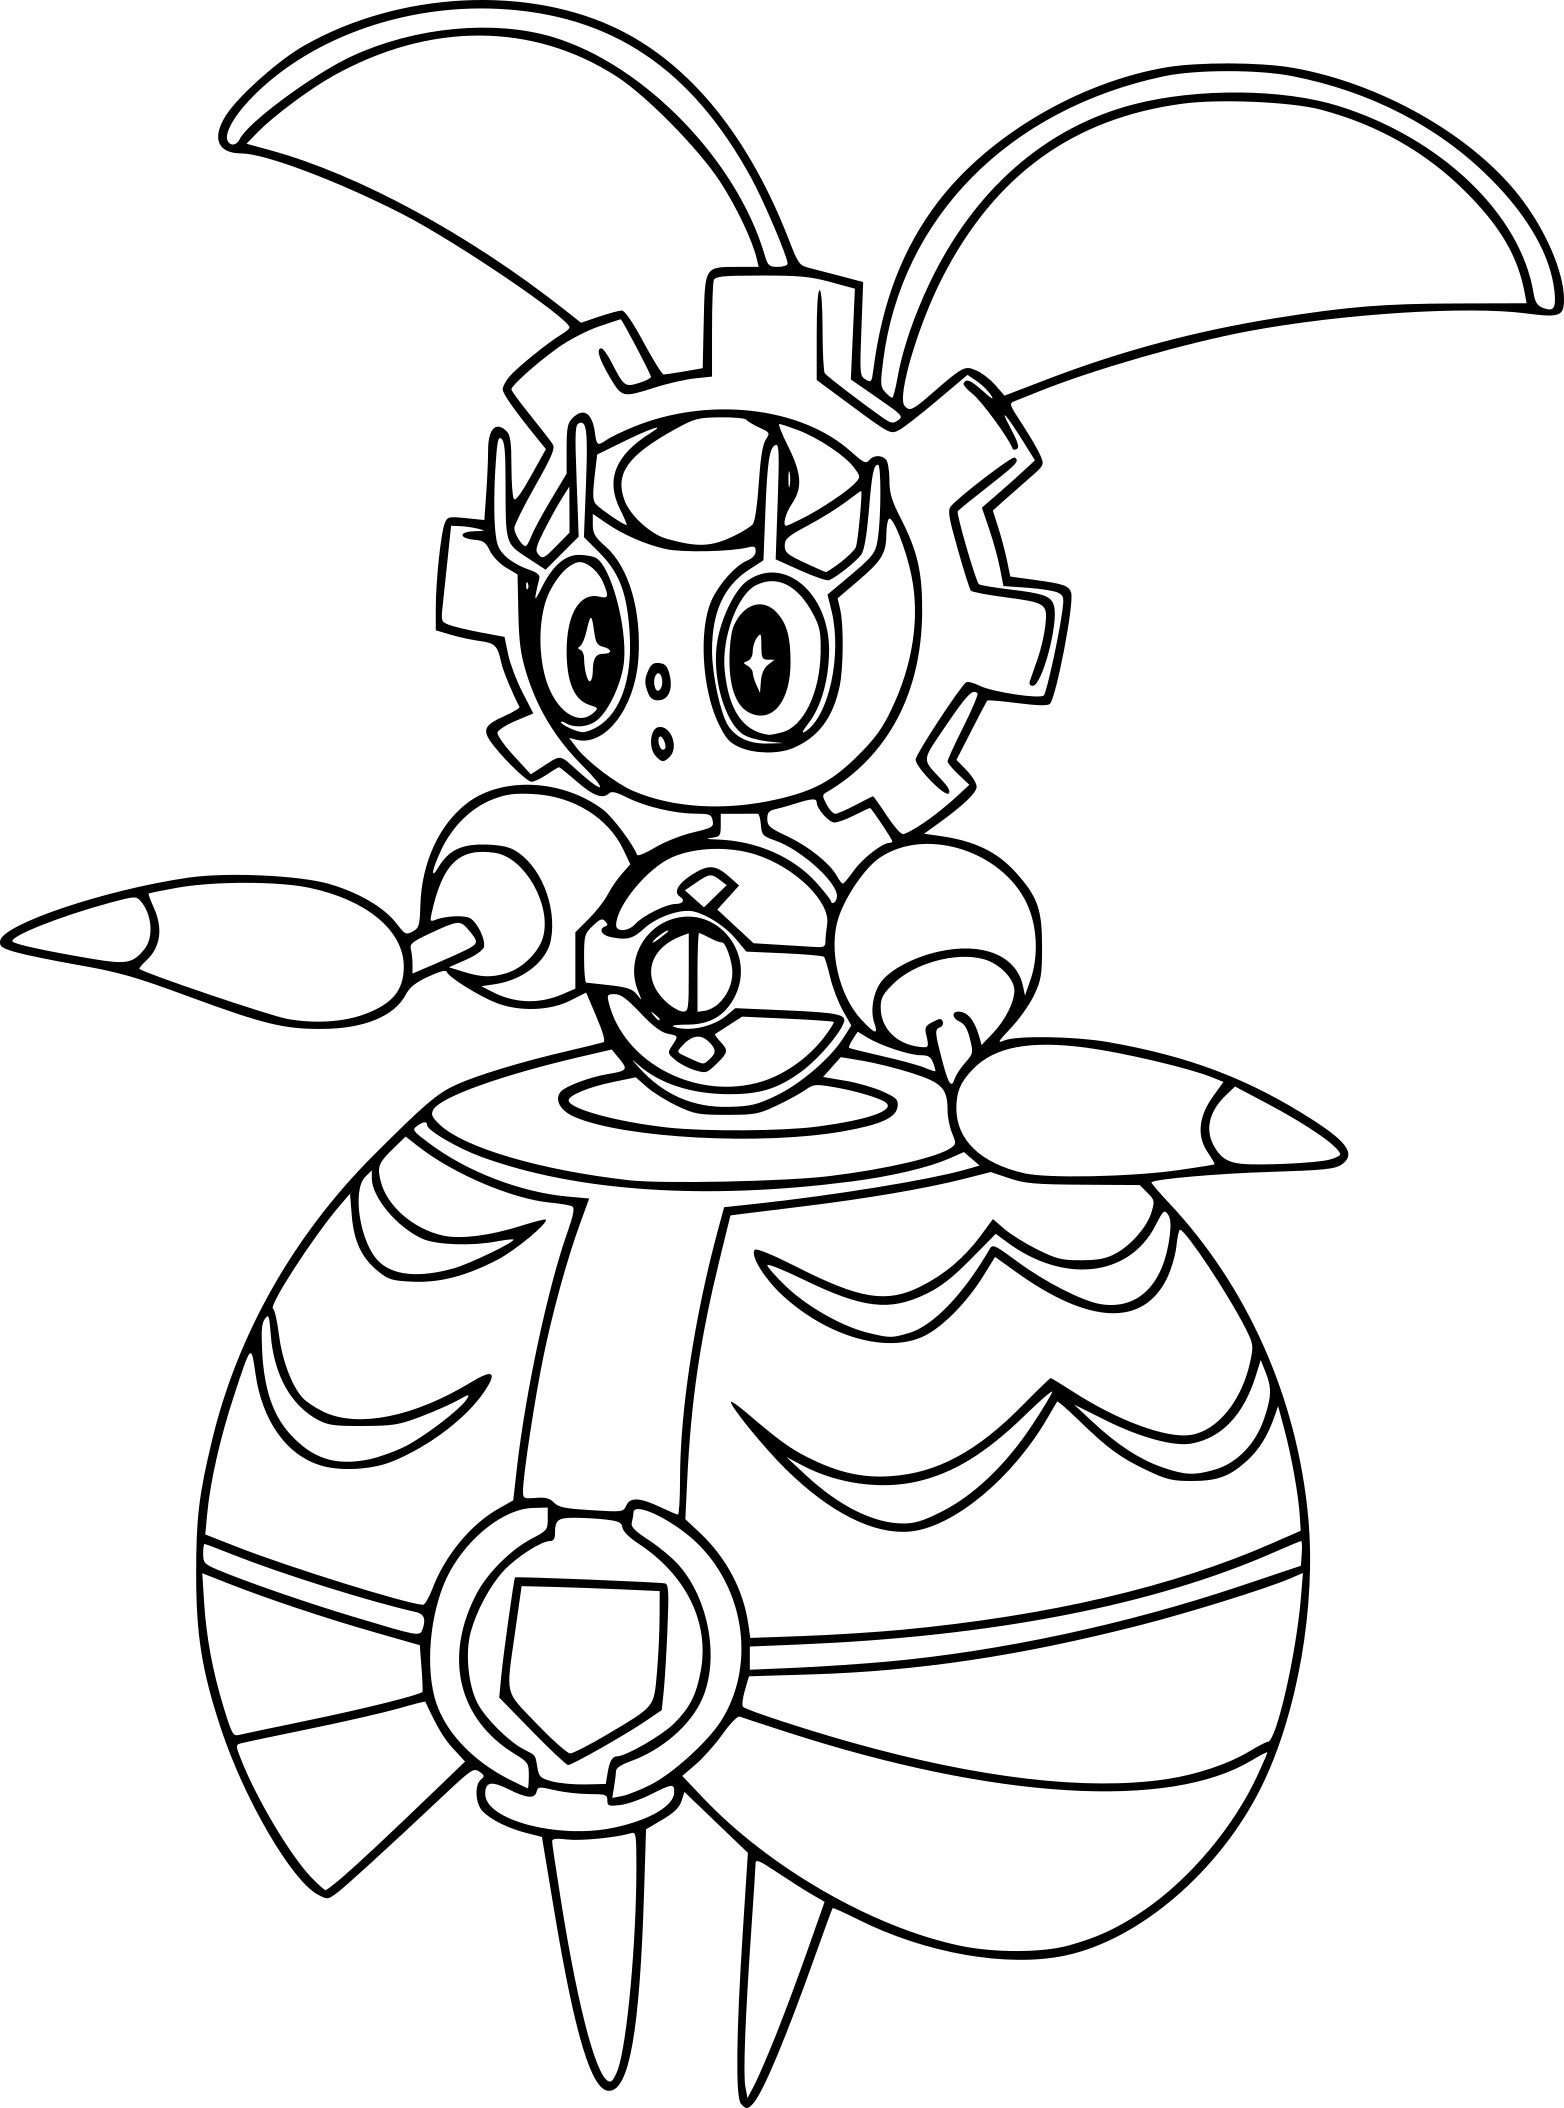 Magearna Pokemon coloring page